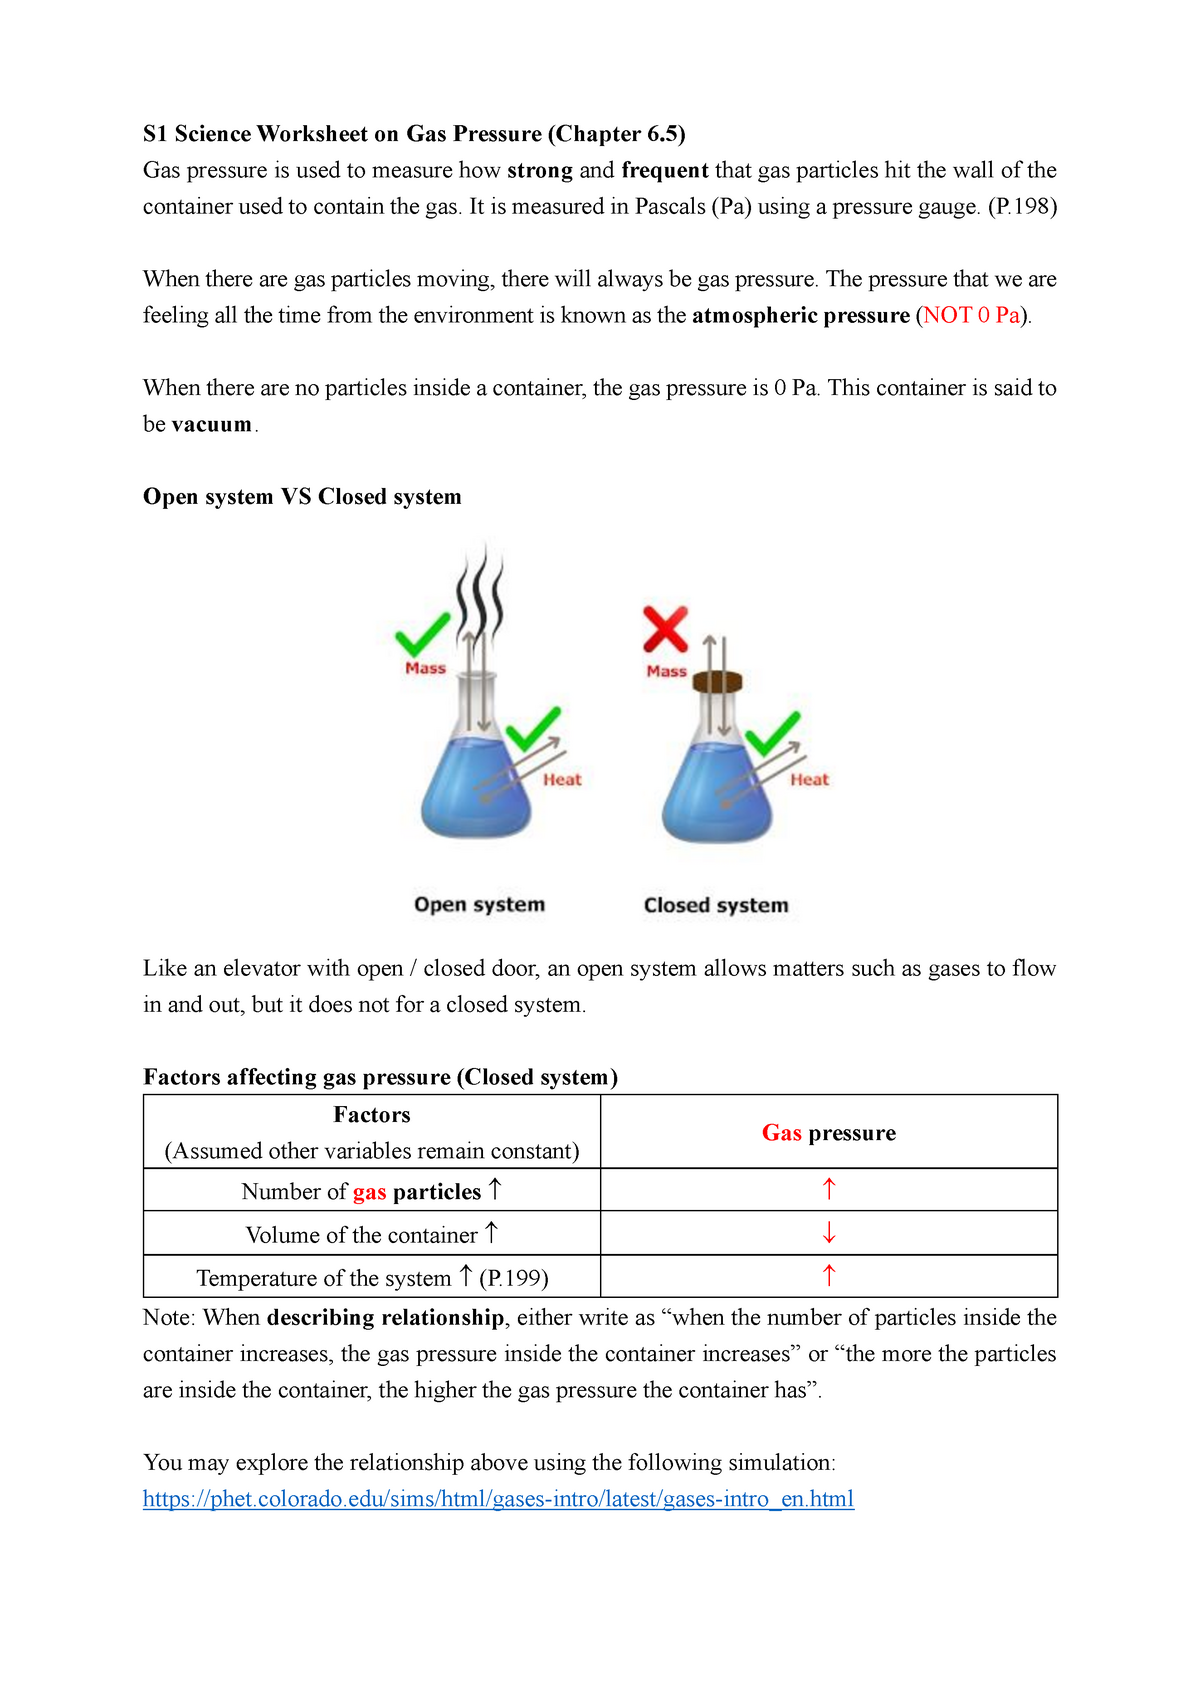 S22 Science Worksheet on Gas Pressure (T) - Biology - 2200 - StuDocu With Gas Variables Worksheet Answers